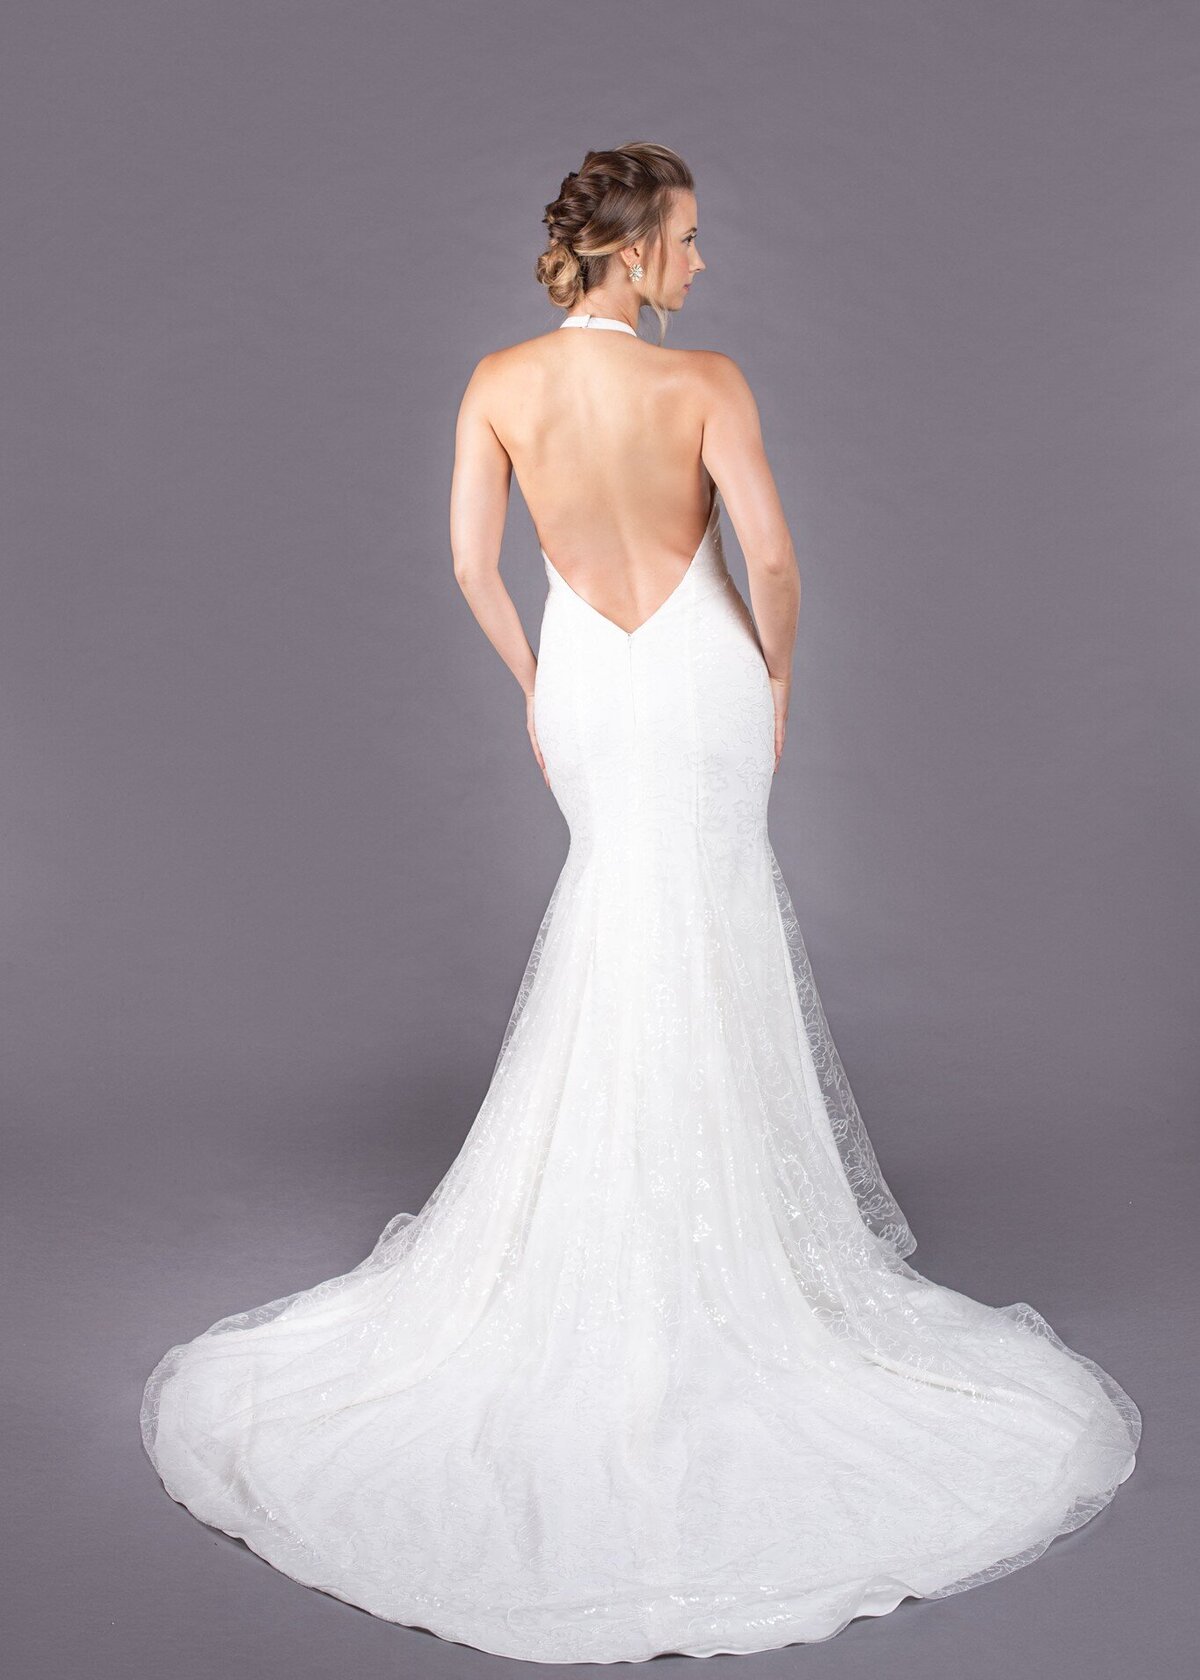 The halter neckline turns into a low open back on the Marlene wedding dress style, which leads into the train.